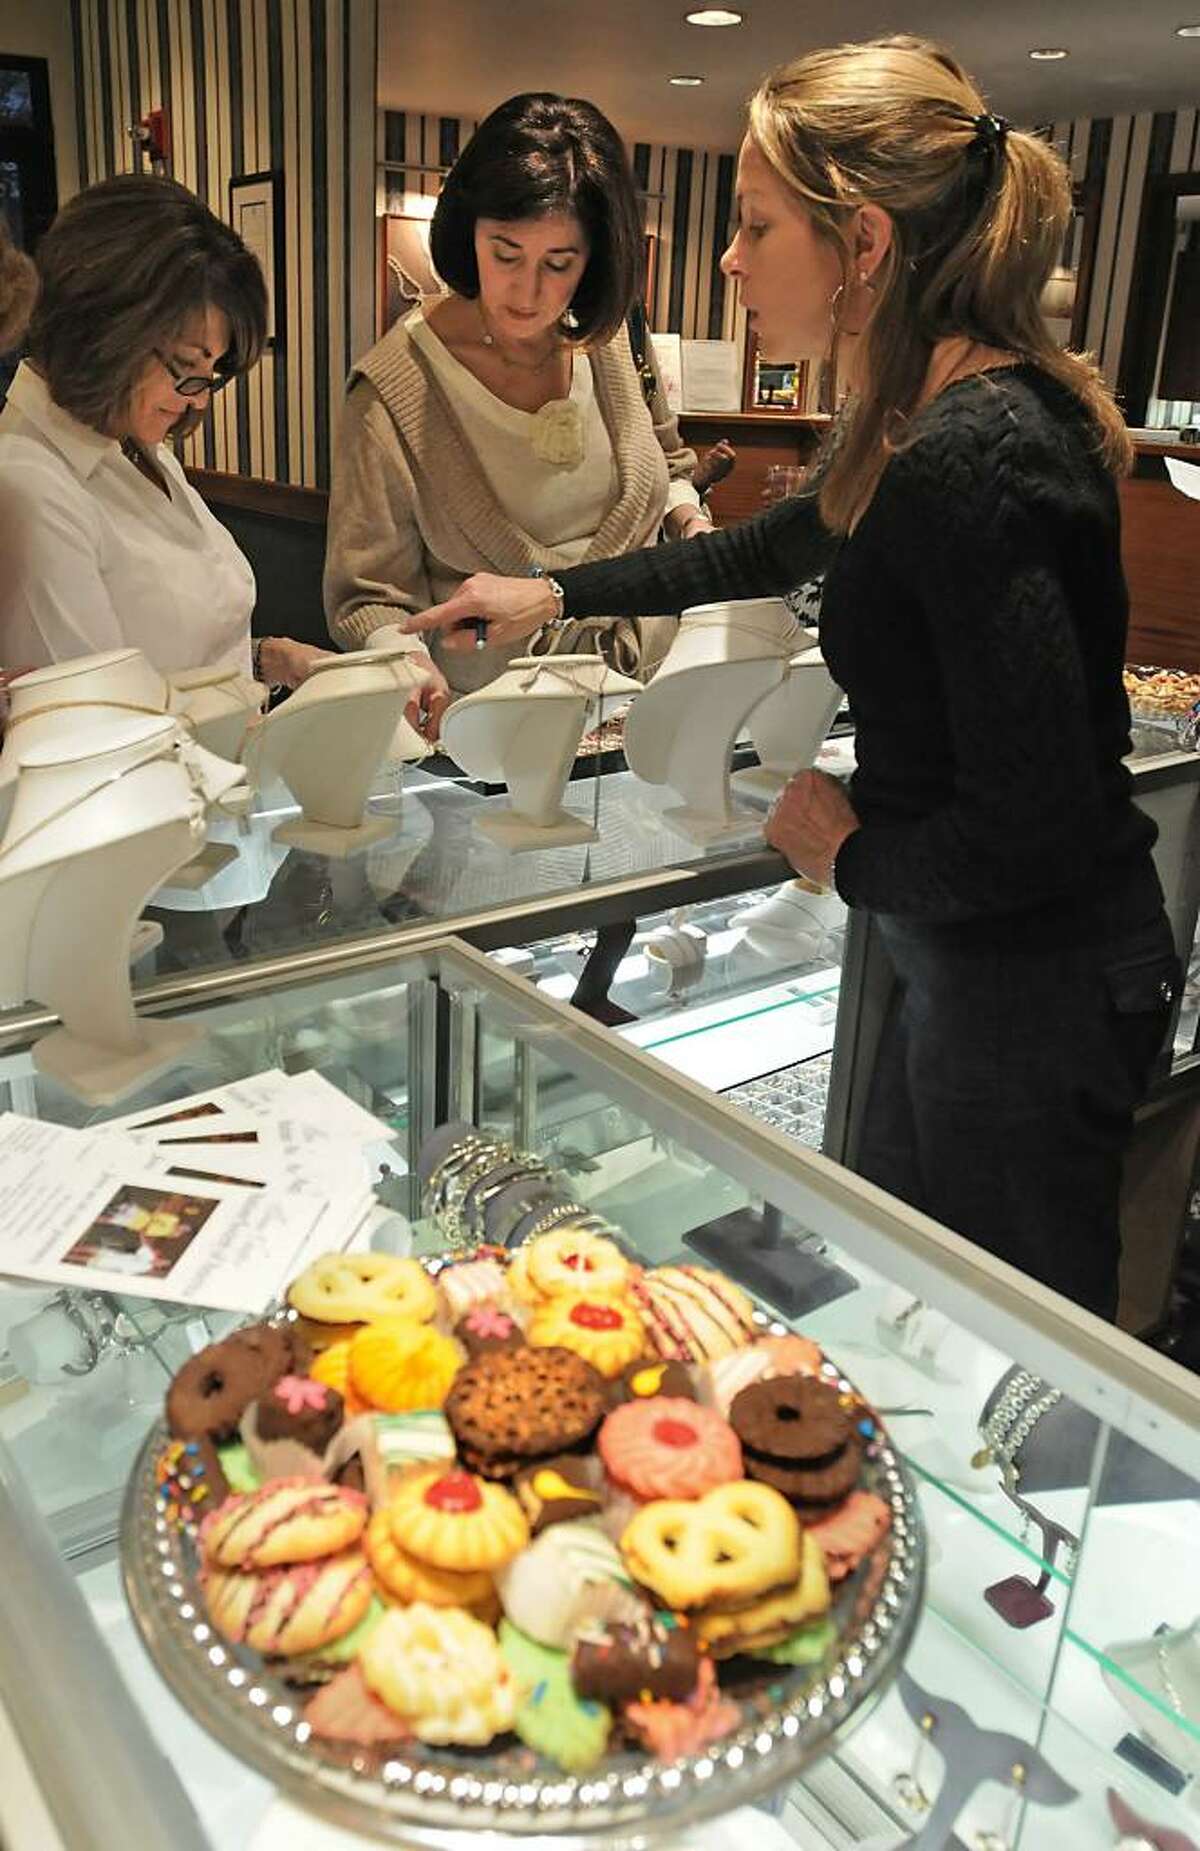 From left, Beverly Ryfa, of Glenmont, and Debra Belkin, of Niskayuna, shop for beads while employee Melissa Blood, of Albany, helps behind the counter at Drue Sanders Jewelry store in Guilderland on Oct. 23, 2009. This party's proceeds will go the the Autism Society of America. (Lori Van Buren / Times Union)